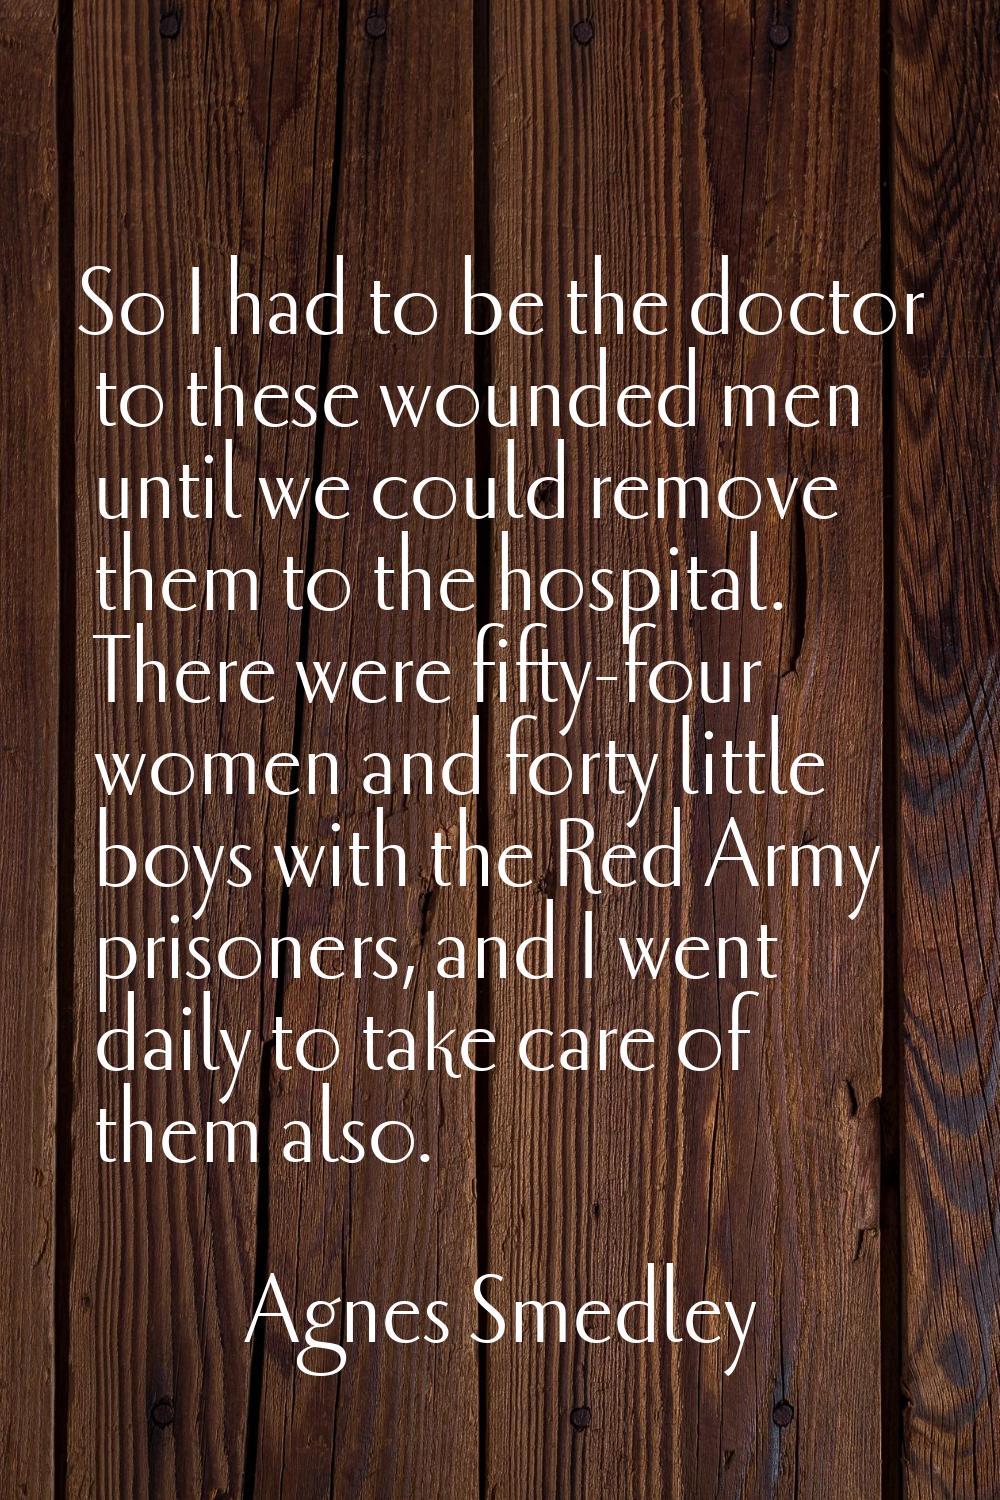 So I had to be the doctor to these wounded men until we could remove them to the hospital. There we